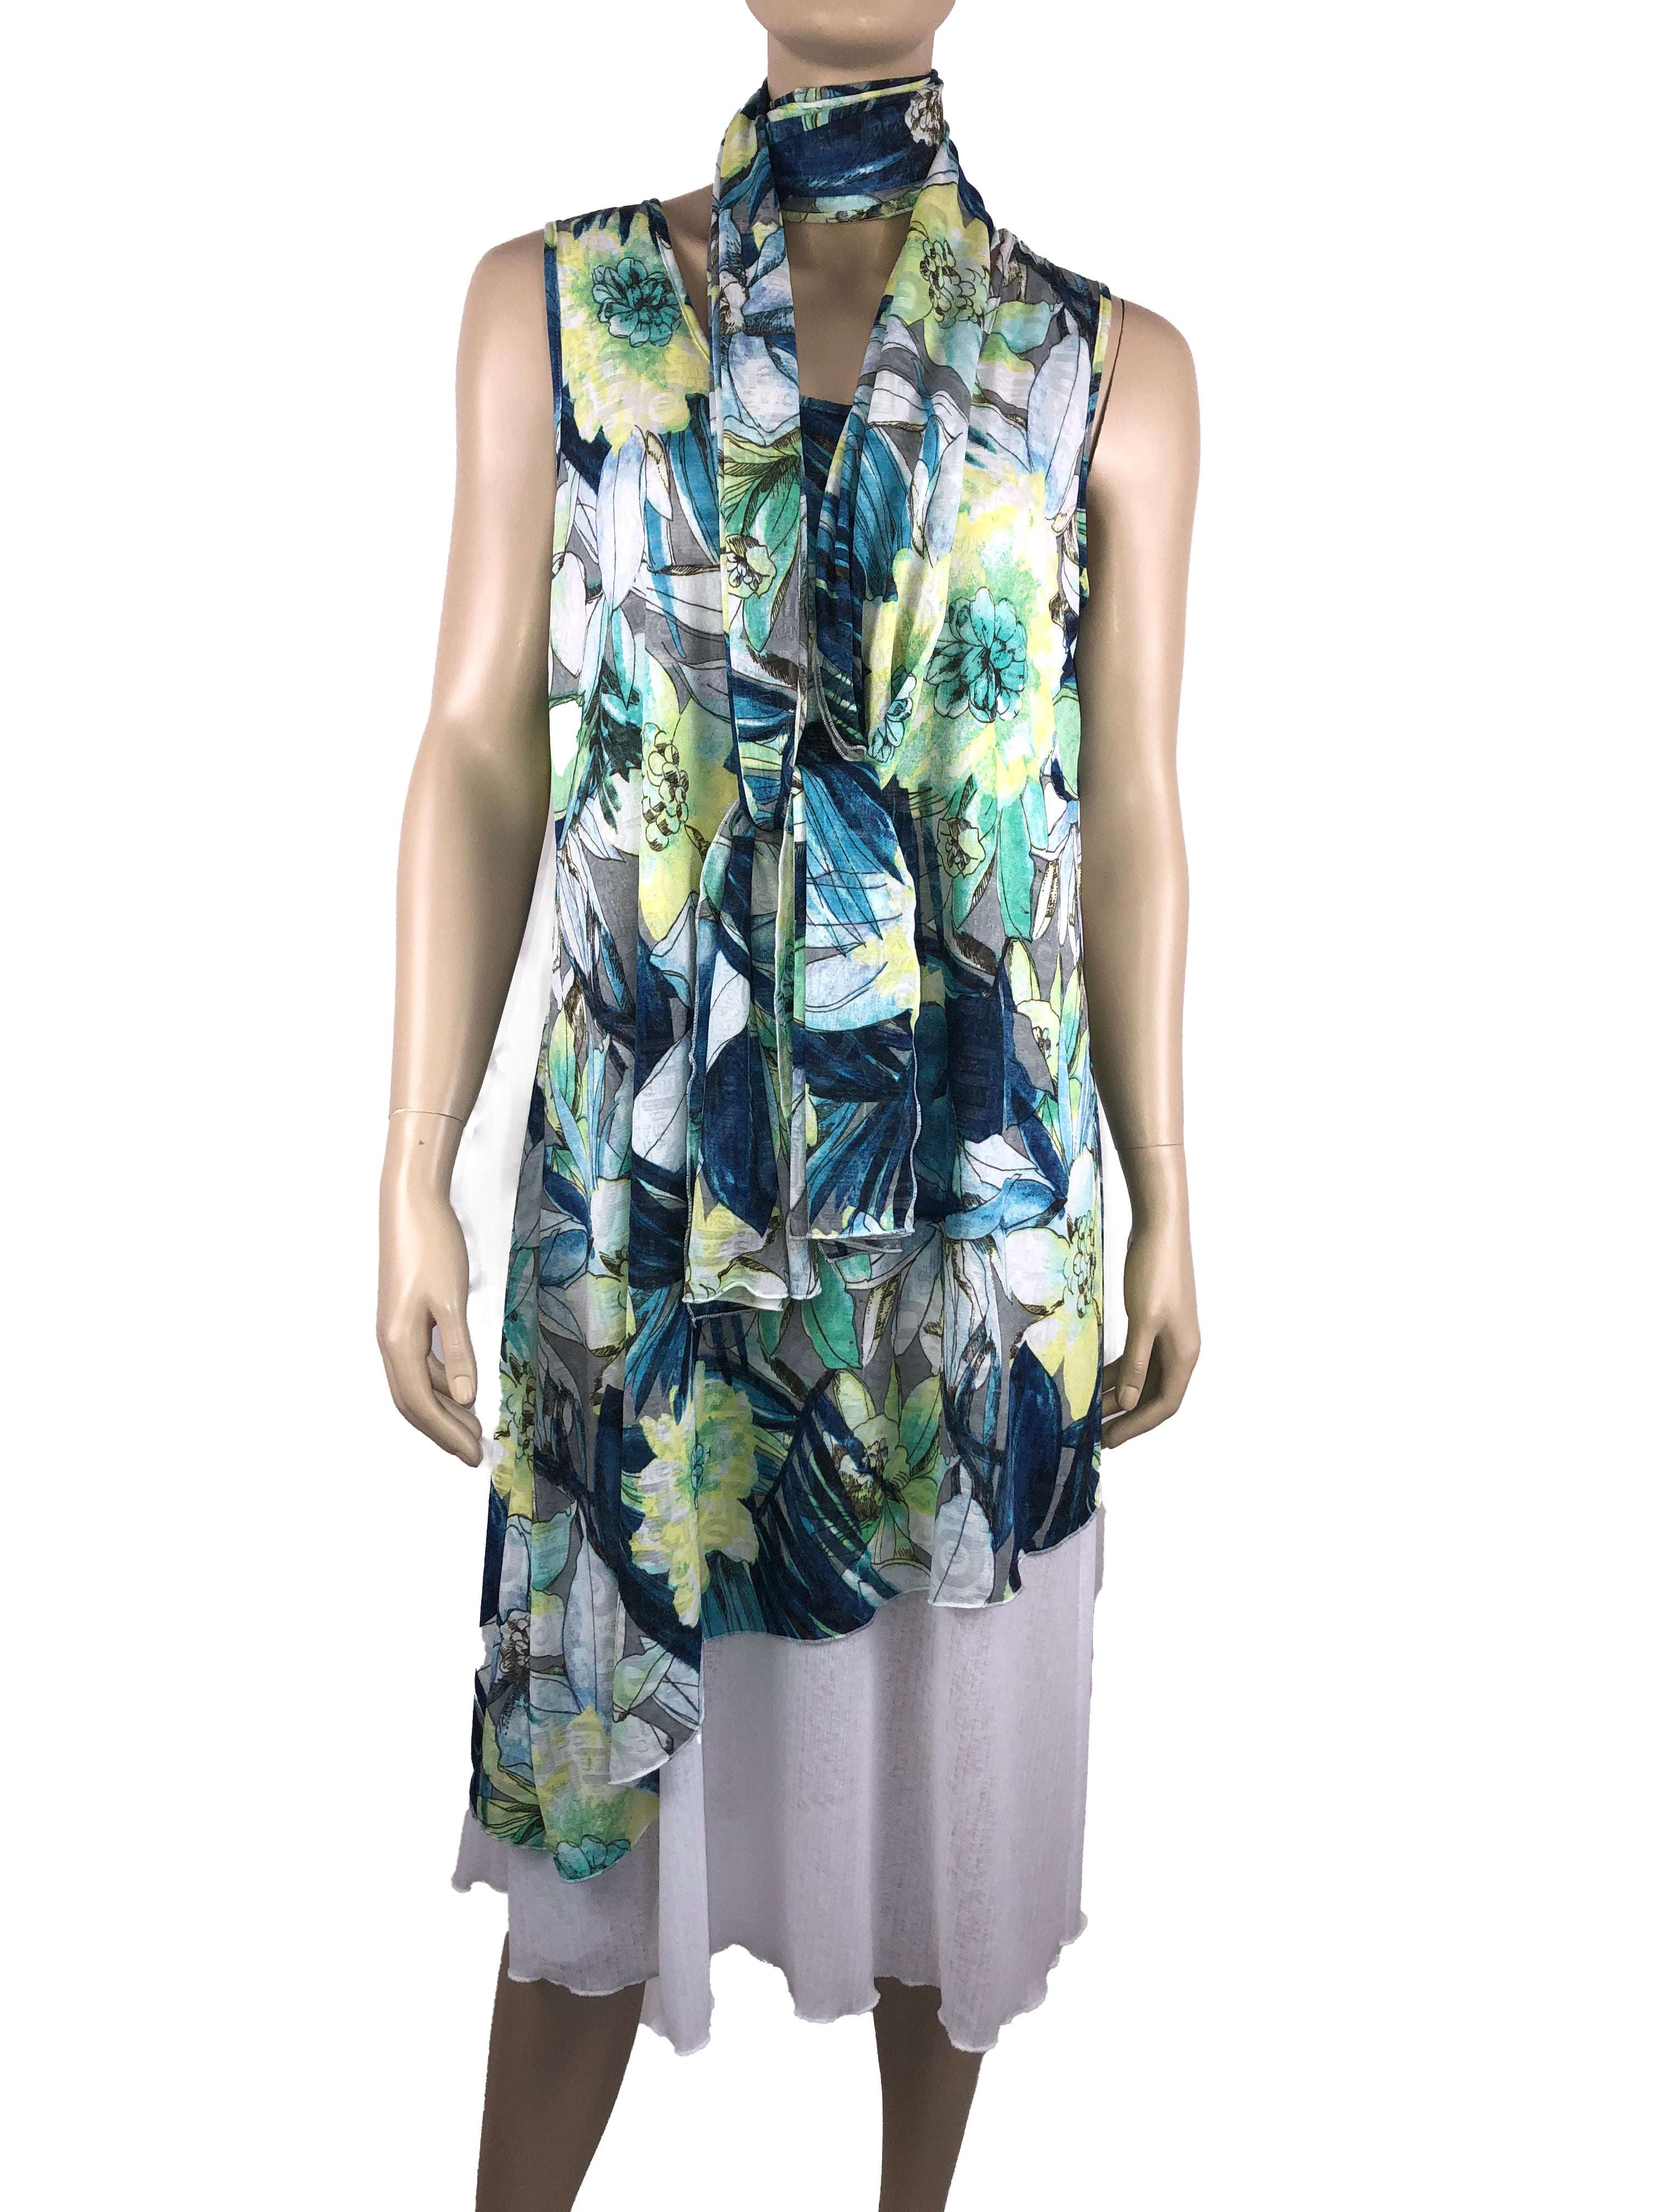 Women's Dresses Canada Soft Colorful Print Layered Flattering Design Includes Shawl Best Quality Stretch Fabric Made in Canada Yvonne Marie Boutiques - Yvonne Marie - Yvonne Marie